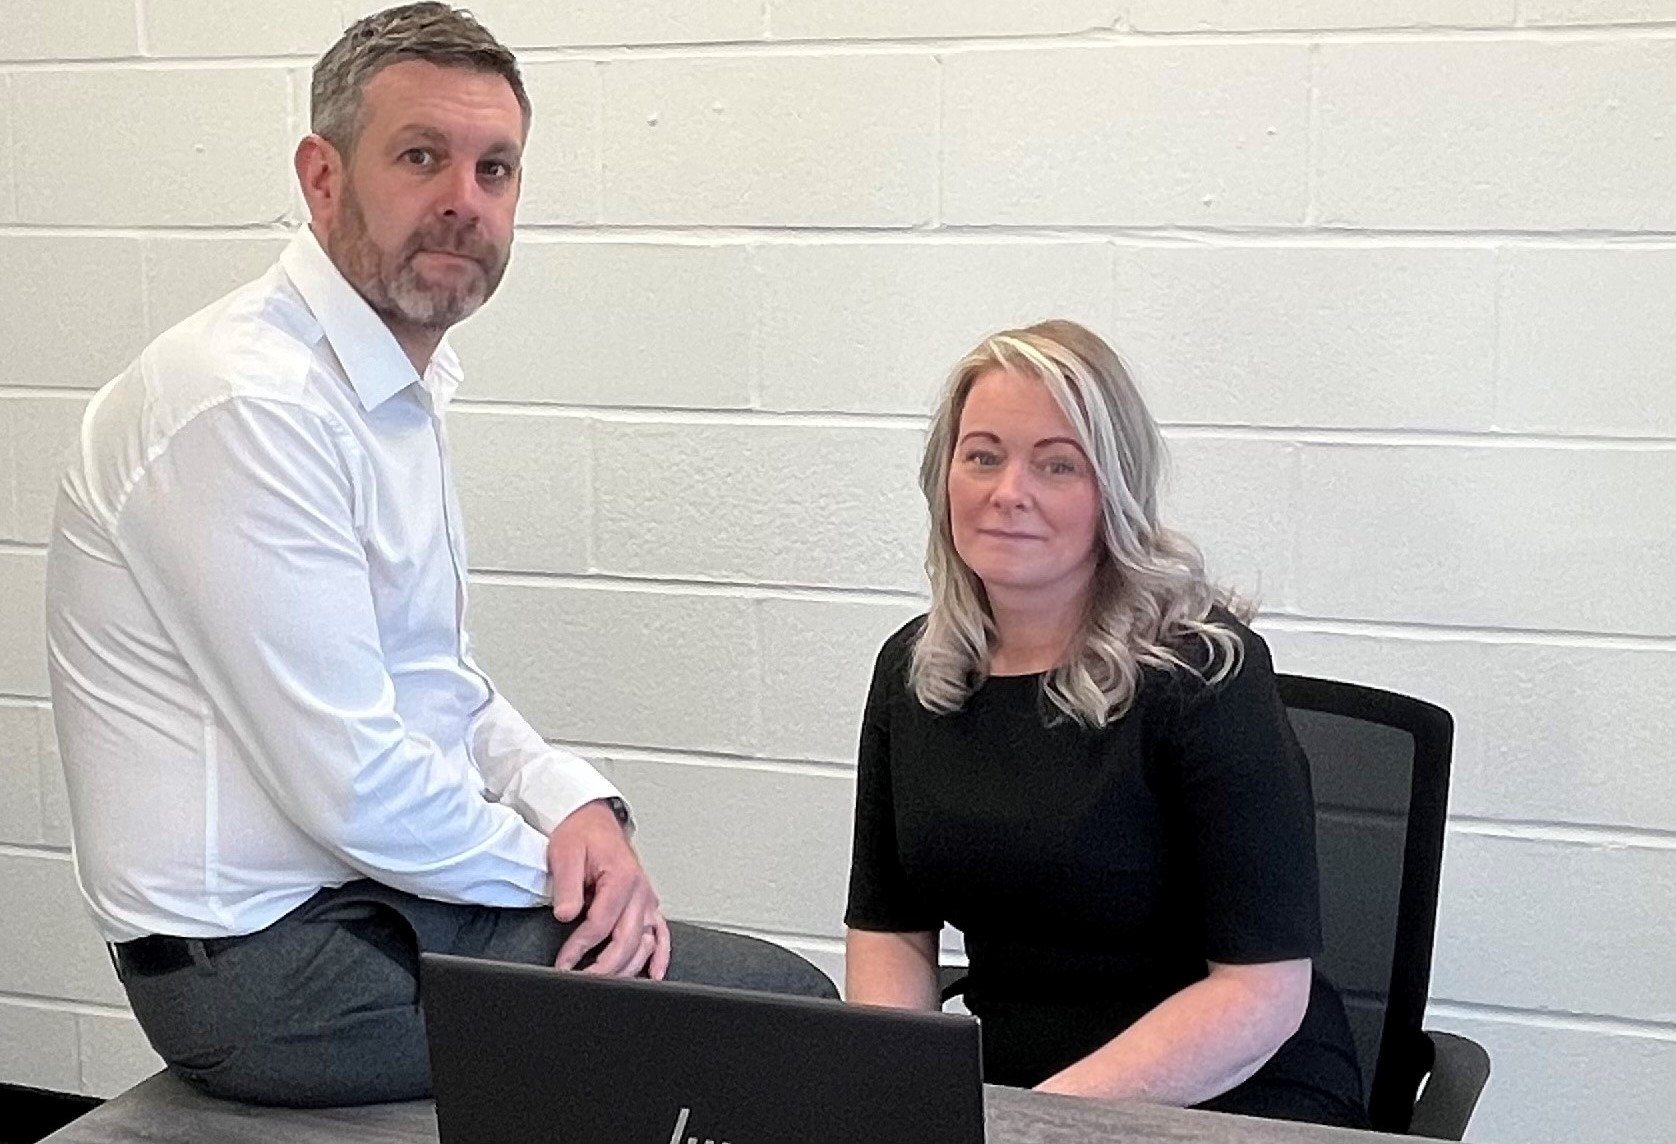 Husband and wife team move to energy sector training firm